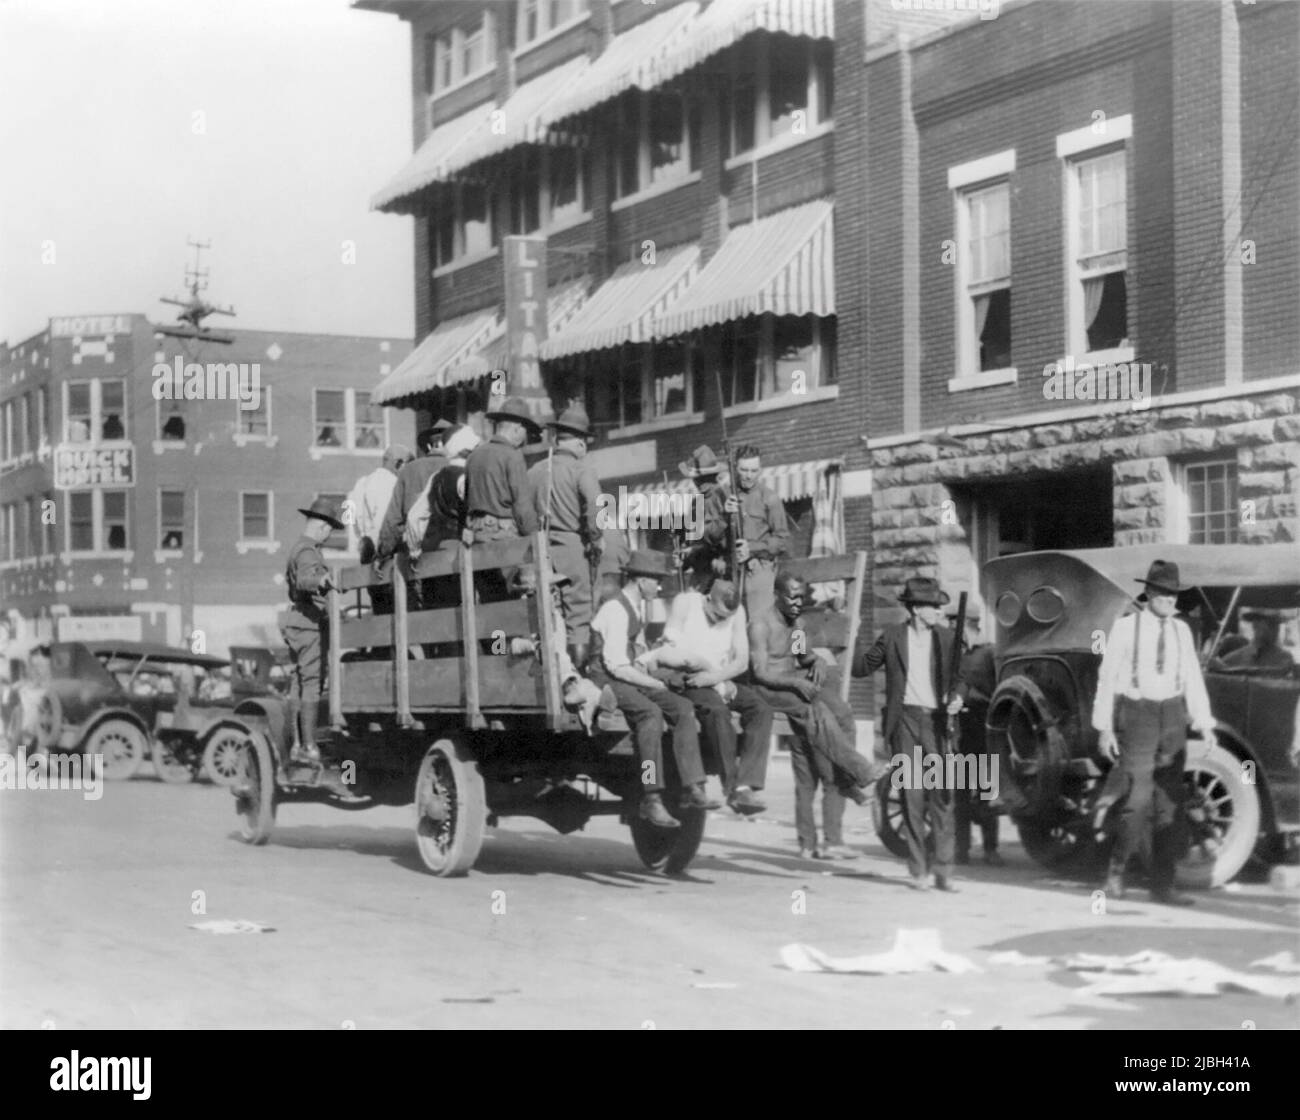 African Americans and white soldiers and civilians on and next to a truck during the Tulsa Race Massacre, also called the Tulsa Race Riot, when a white mob attacked the predominantly African American Greenwood neighborhood of Tulsa, Oklahoma in 1921. (USA) Stock Photo